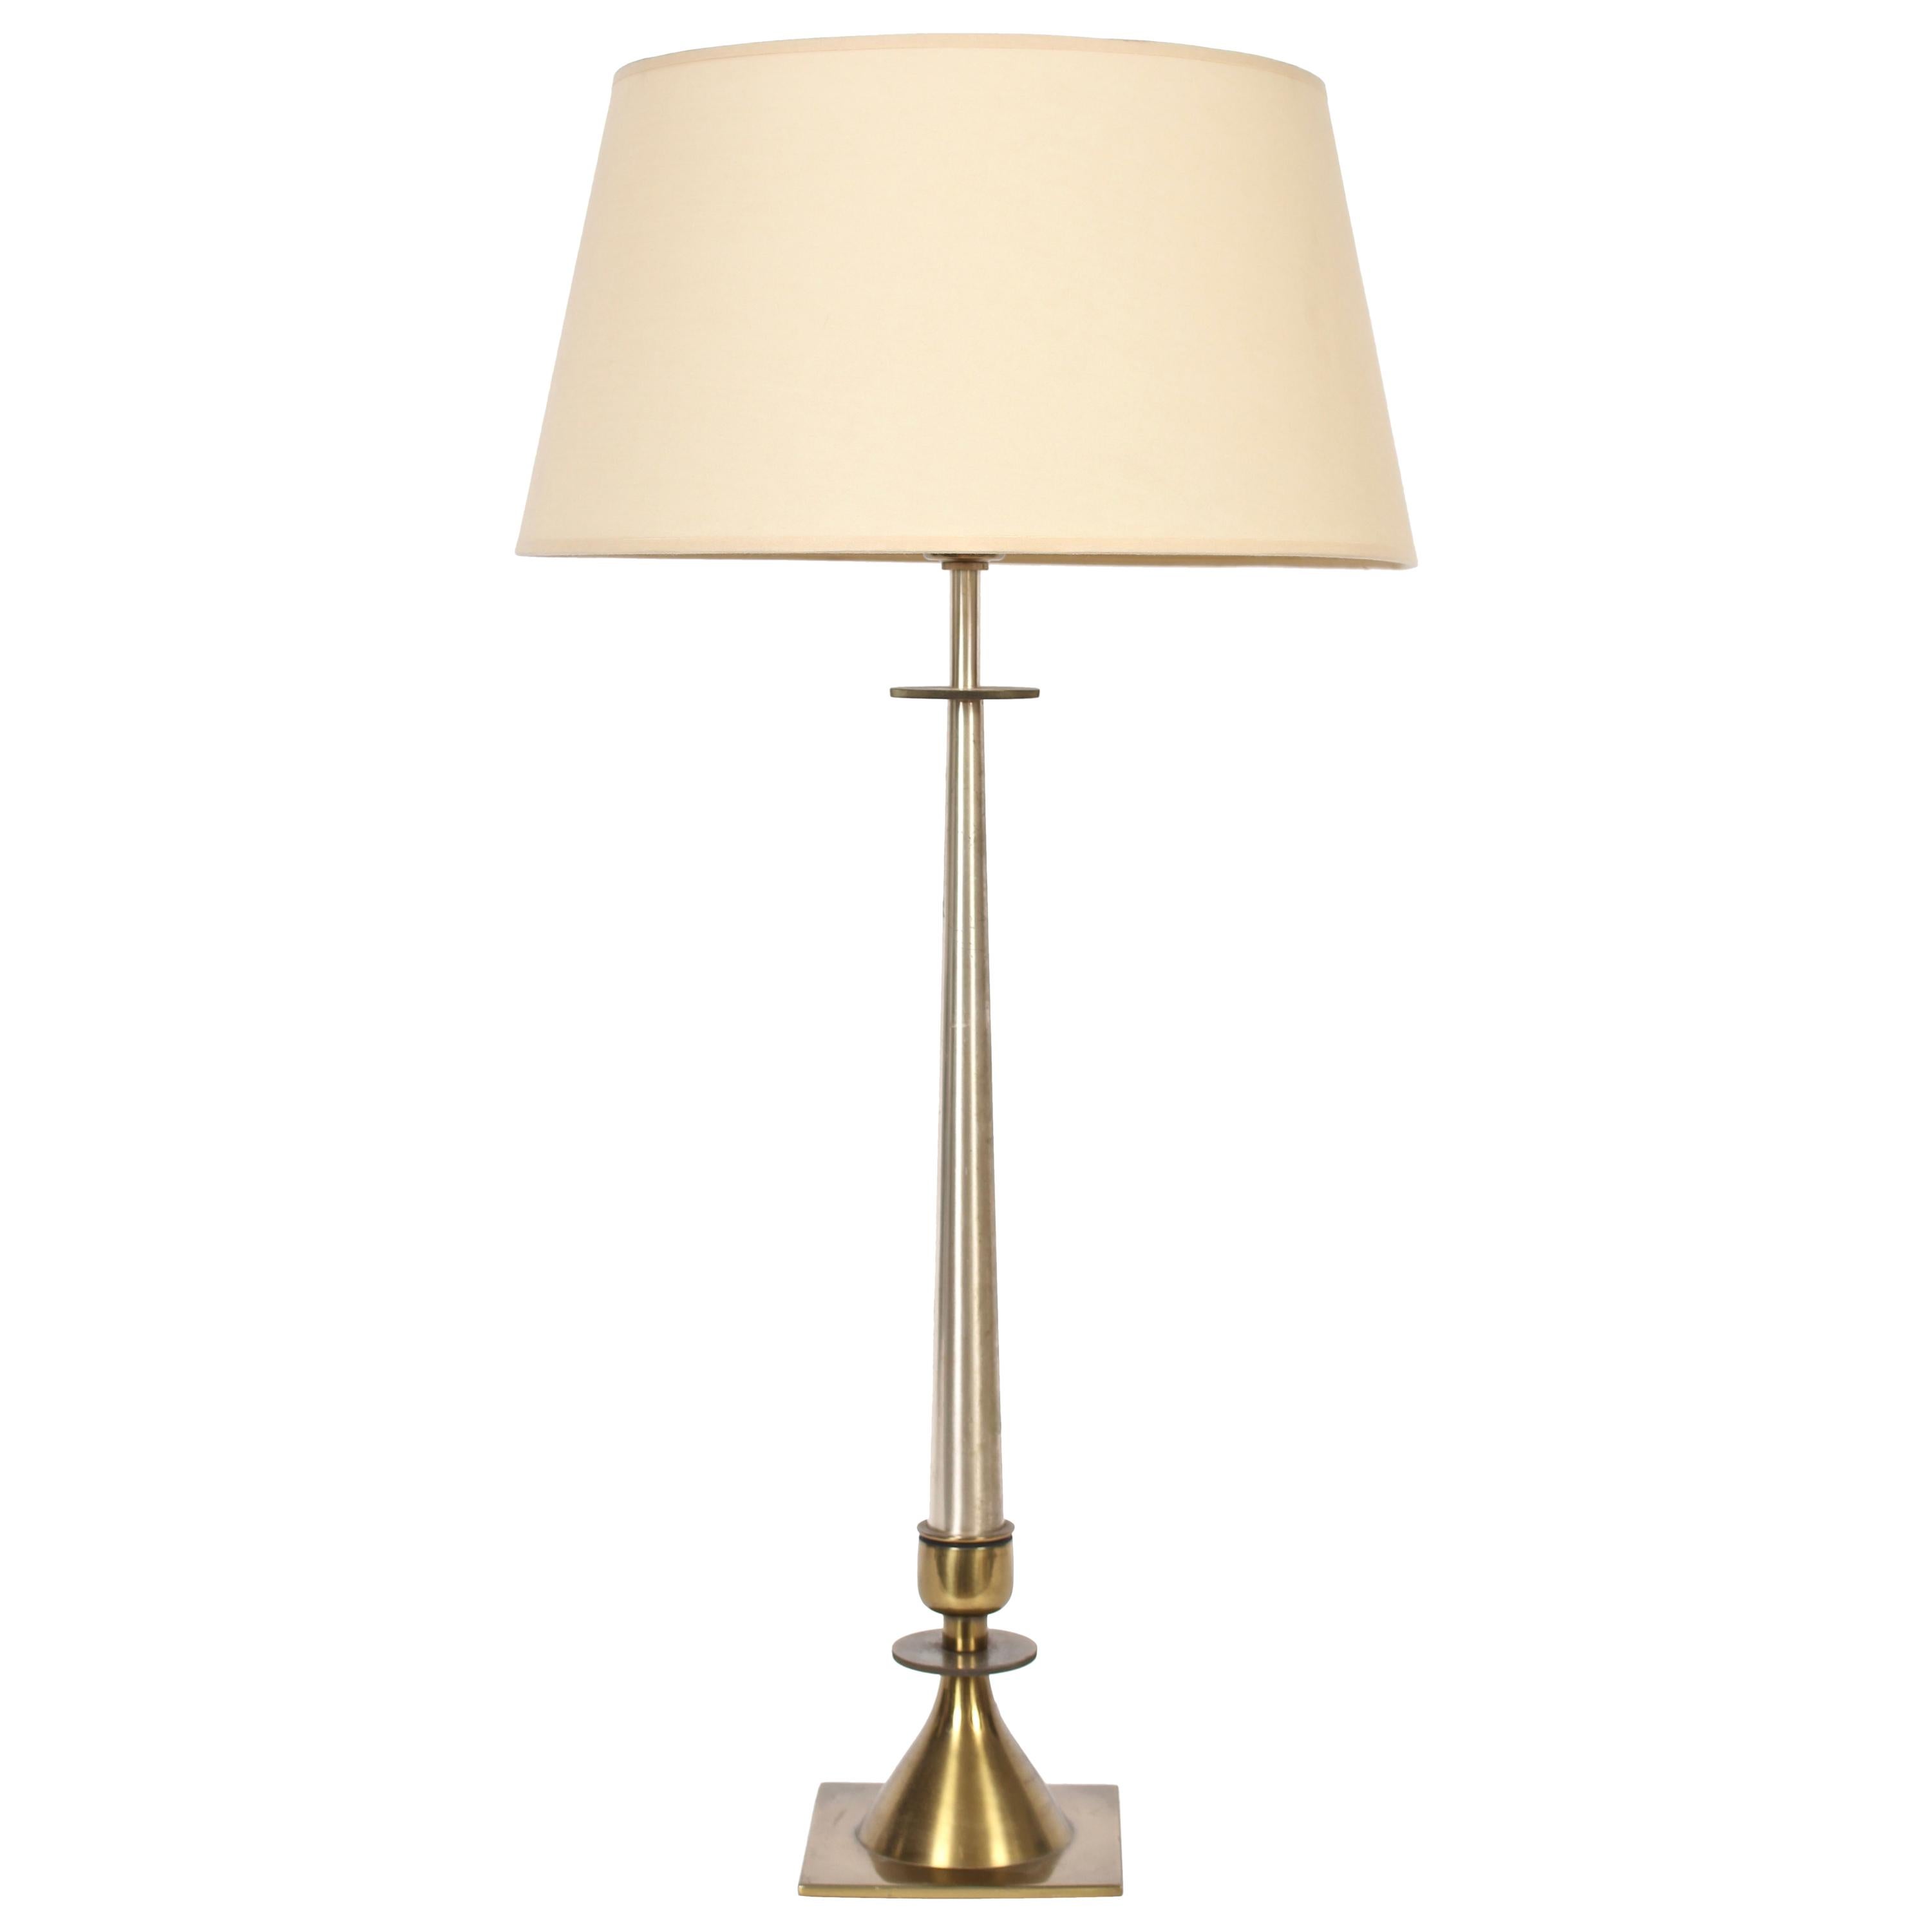 Tall Tommi Parzinger Style Nickel & Brass Stiffel Lamp with Milk Glass Shade For Sale